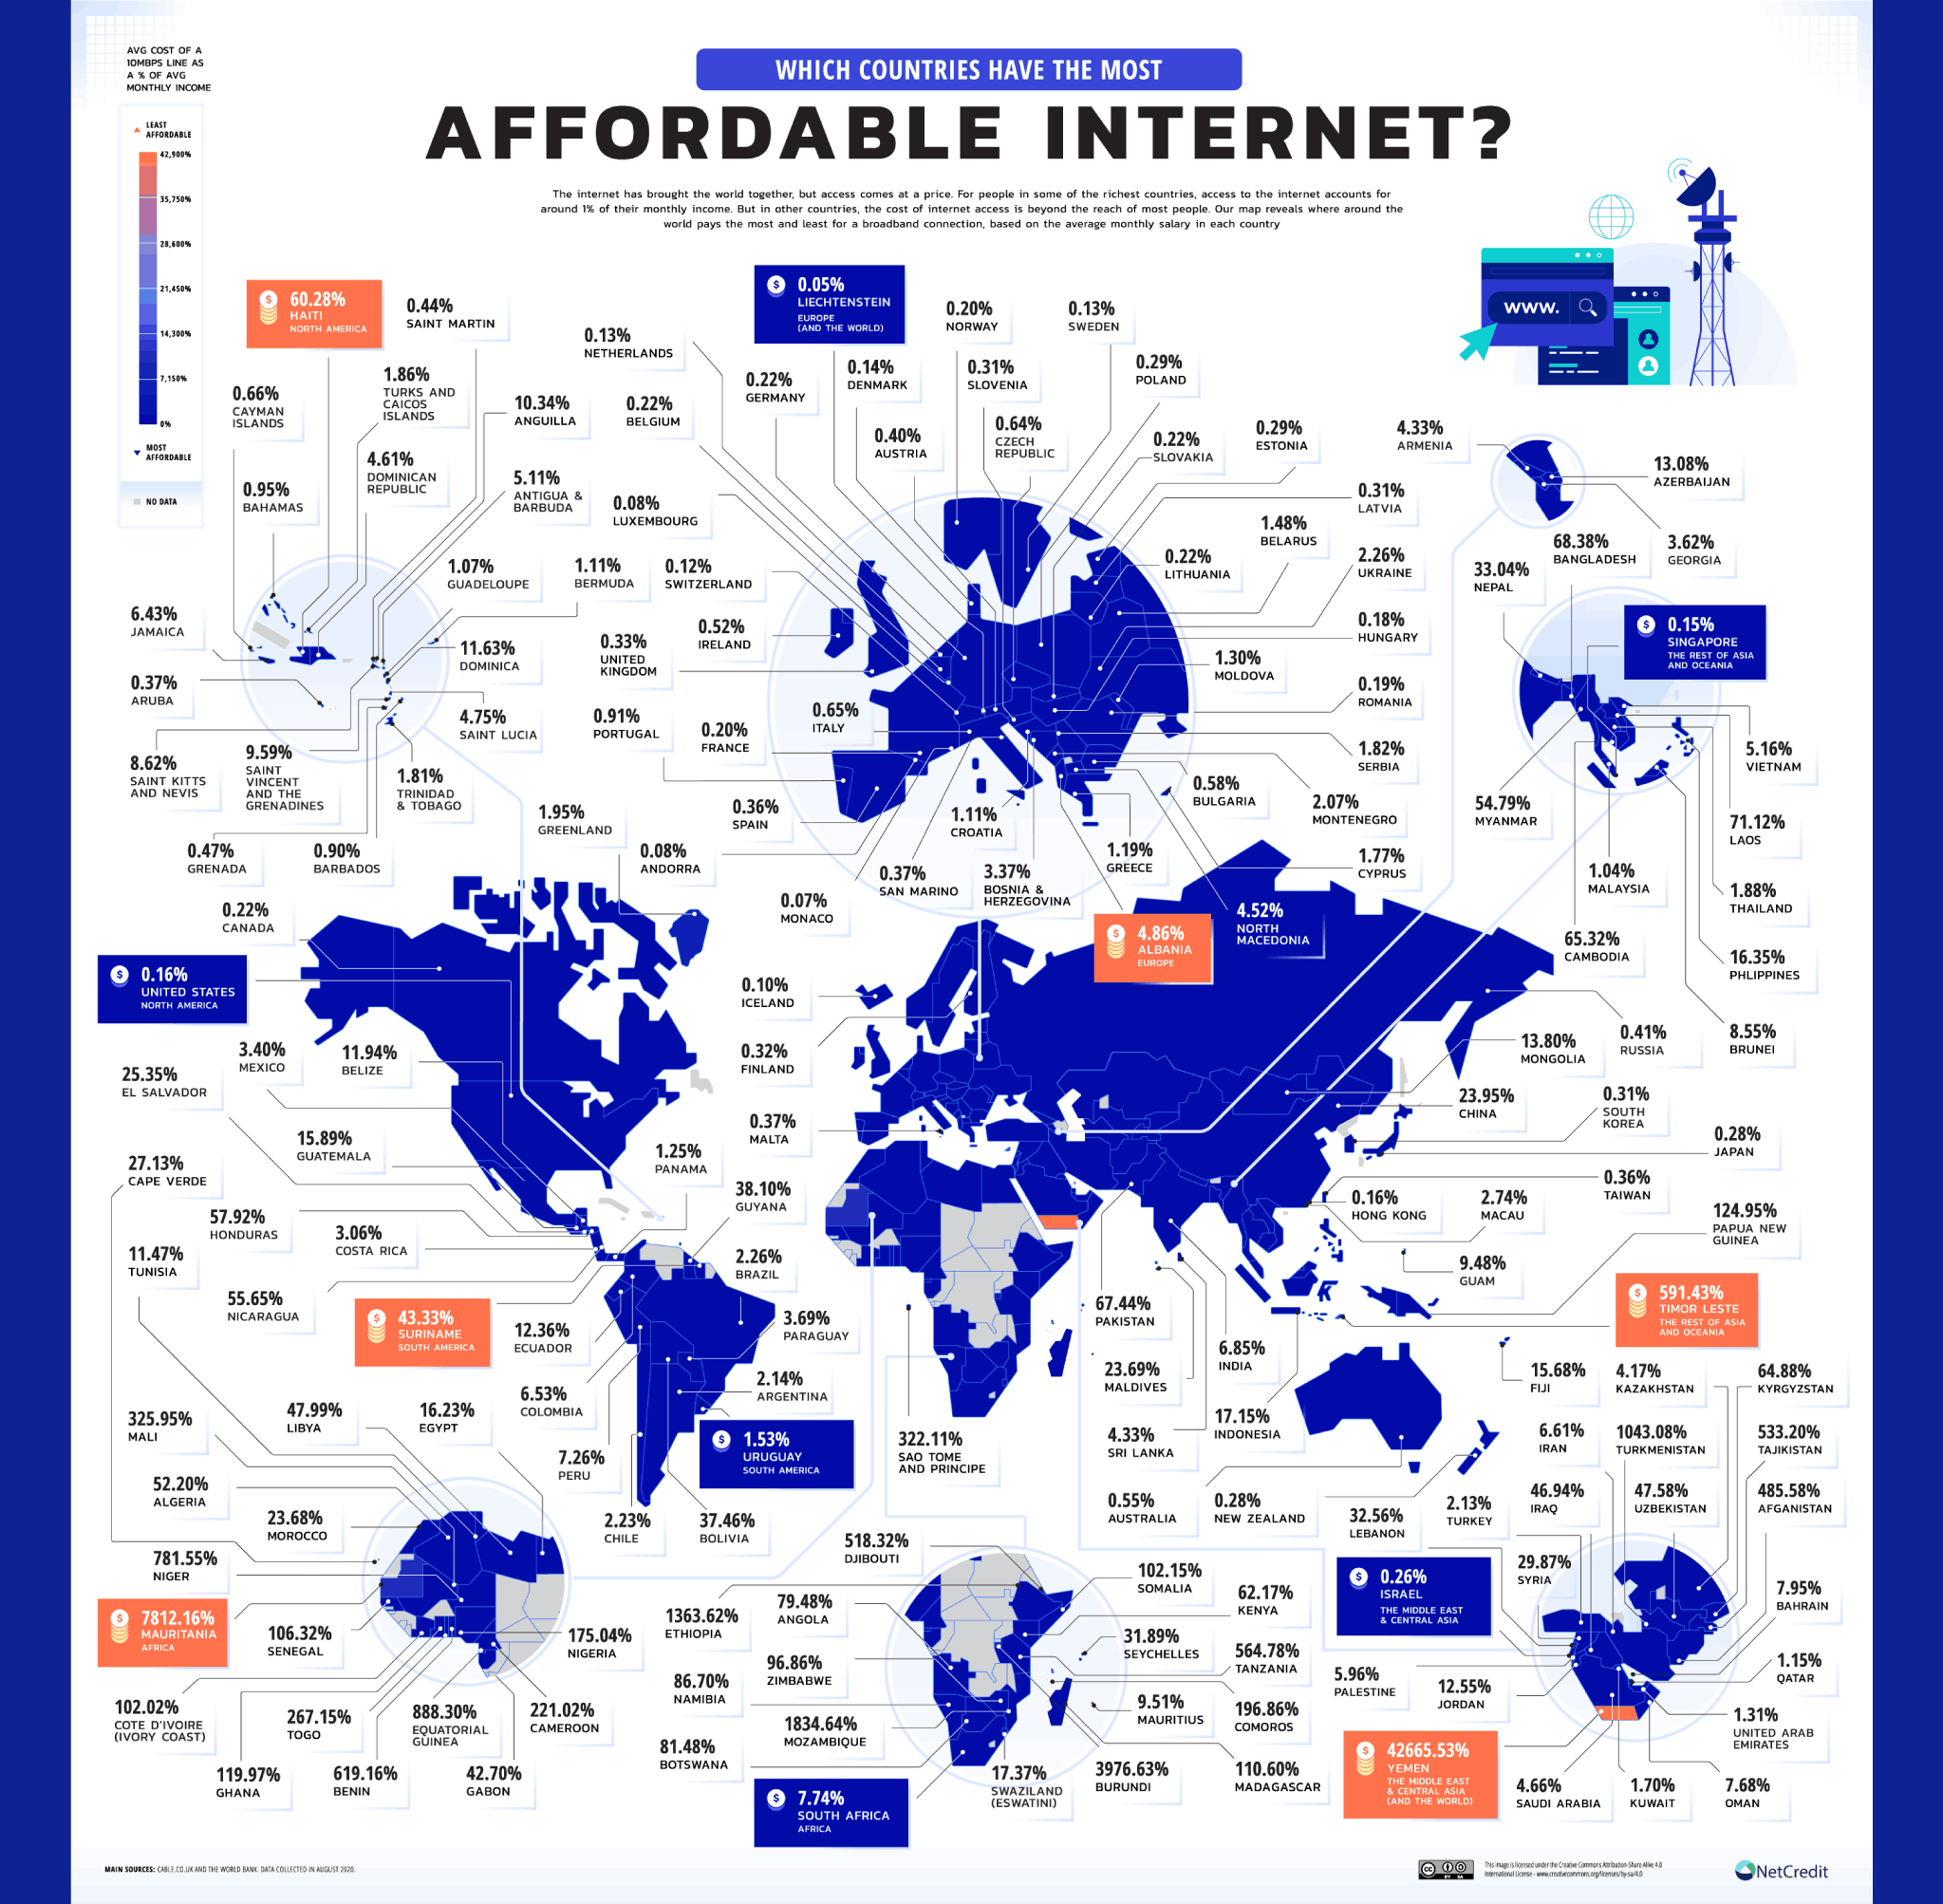 Which Countries Have the Most Affordable Internet?